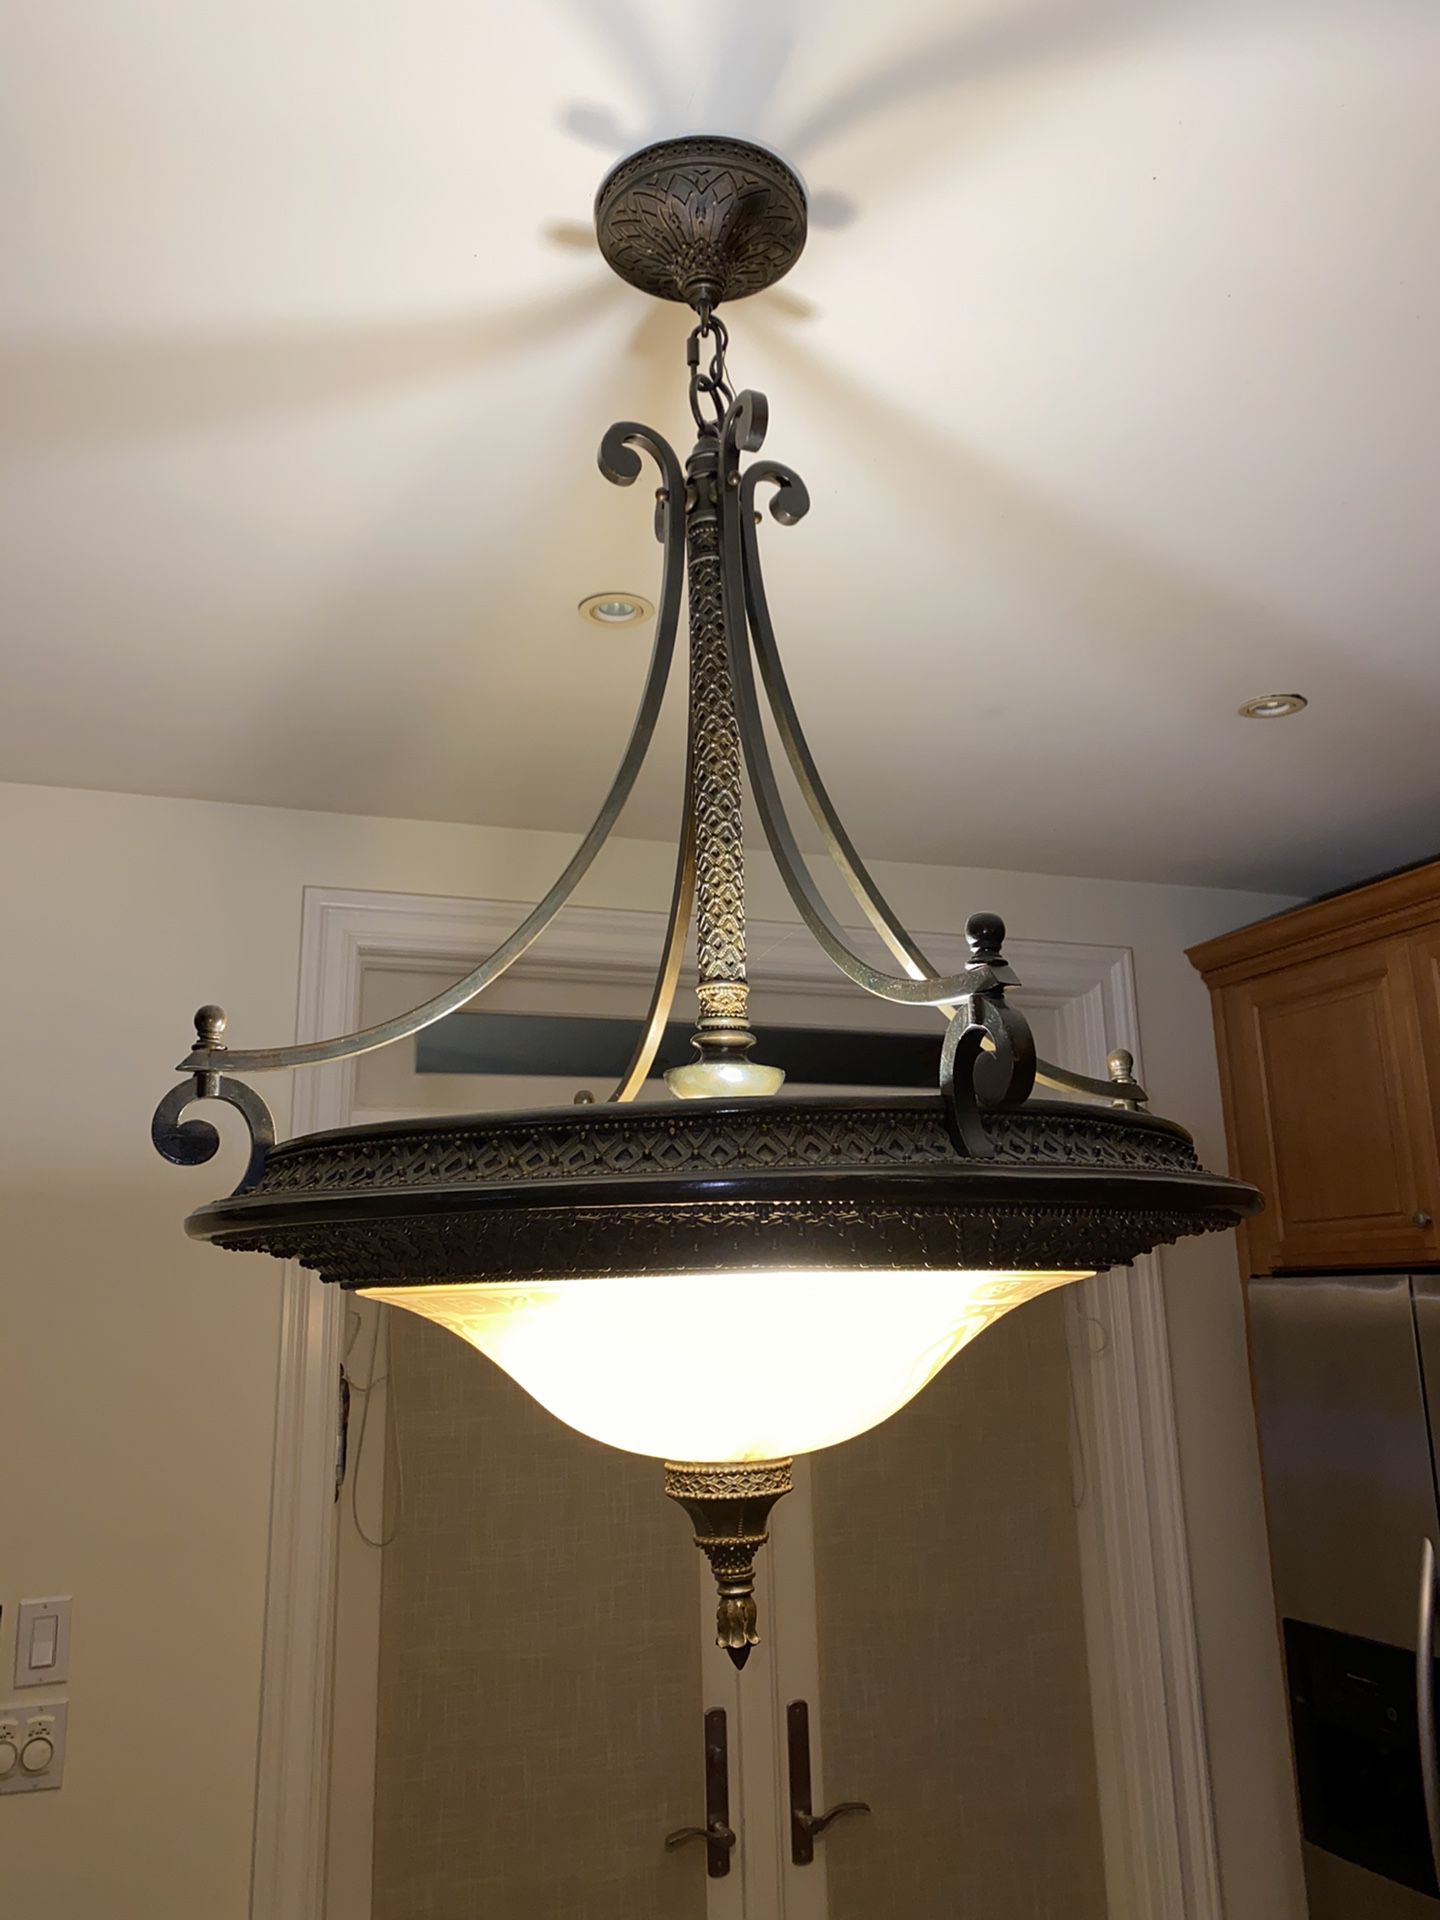 Hanging celling kitchen light fixture.